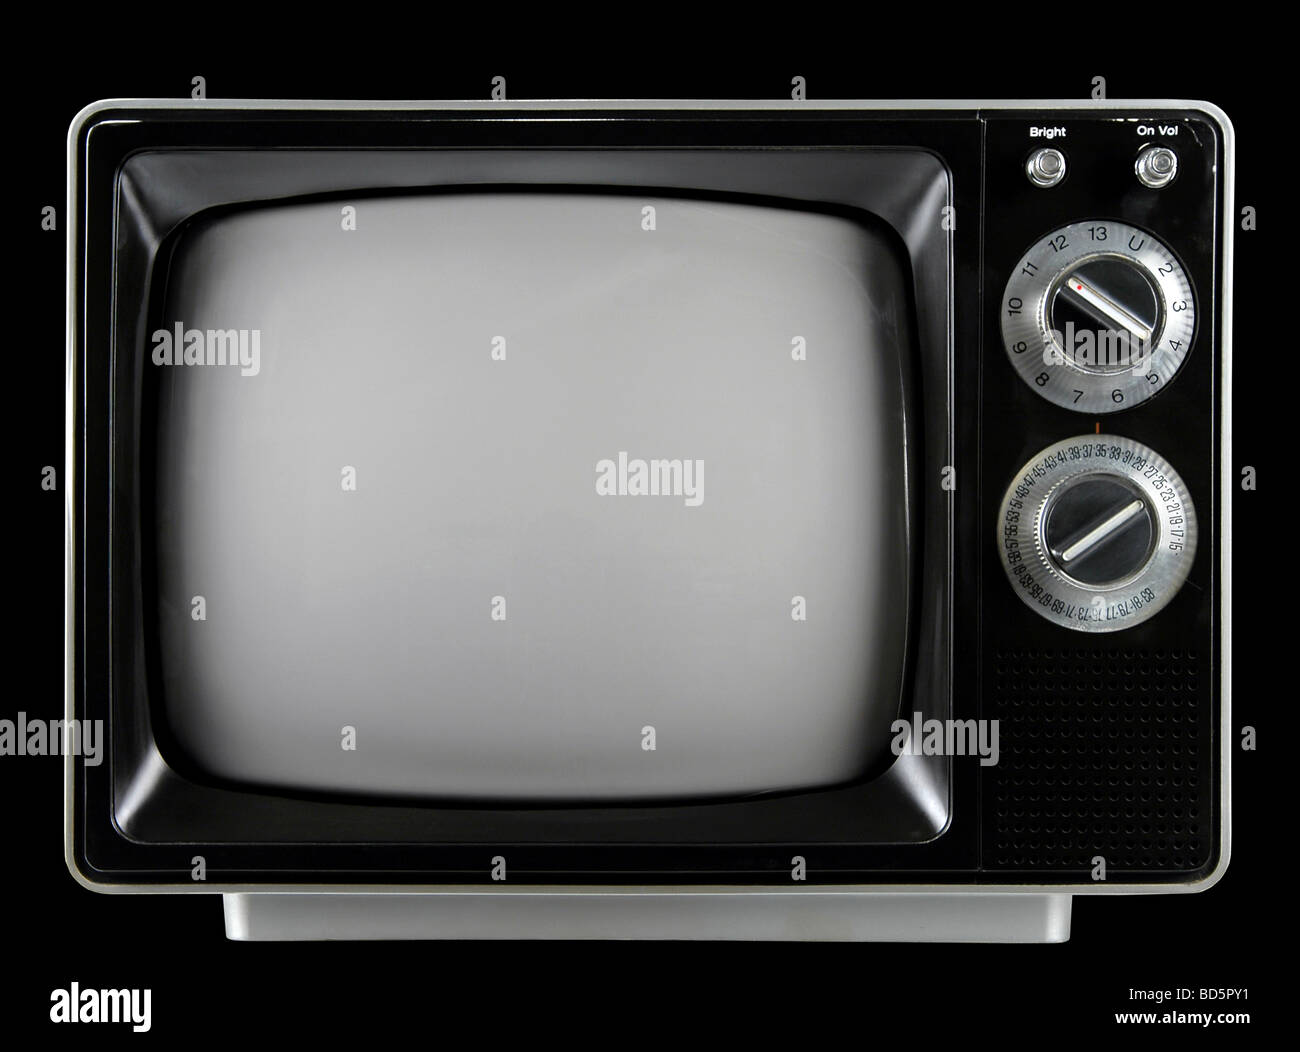 Vintage Television with knobs and buttons isolated over a black background  Stock Photo - Alamy